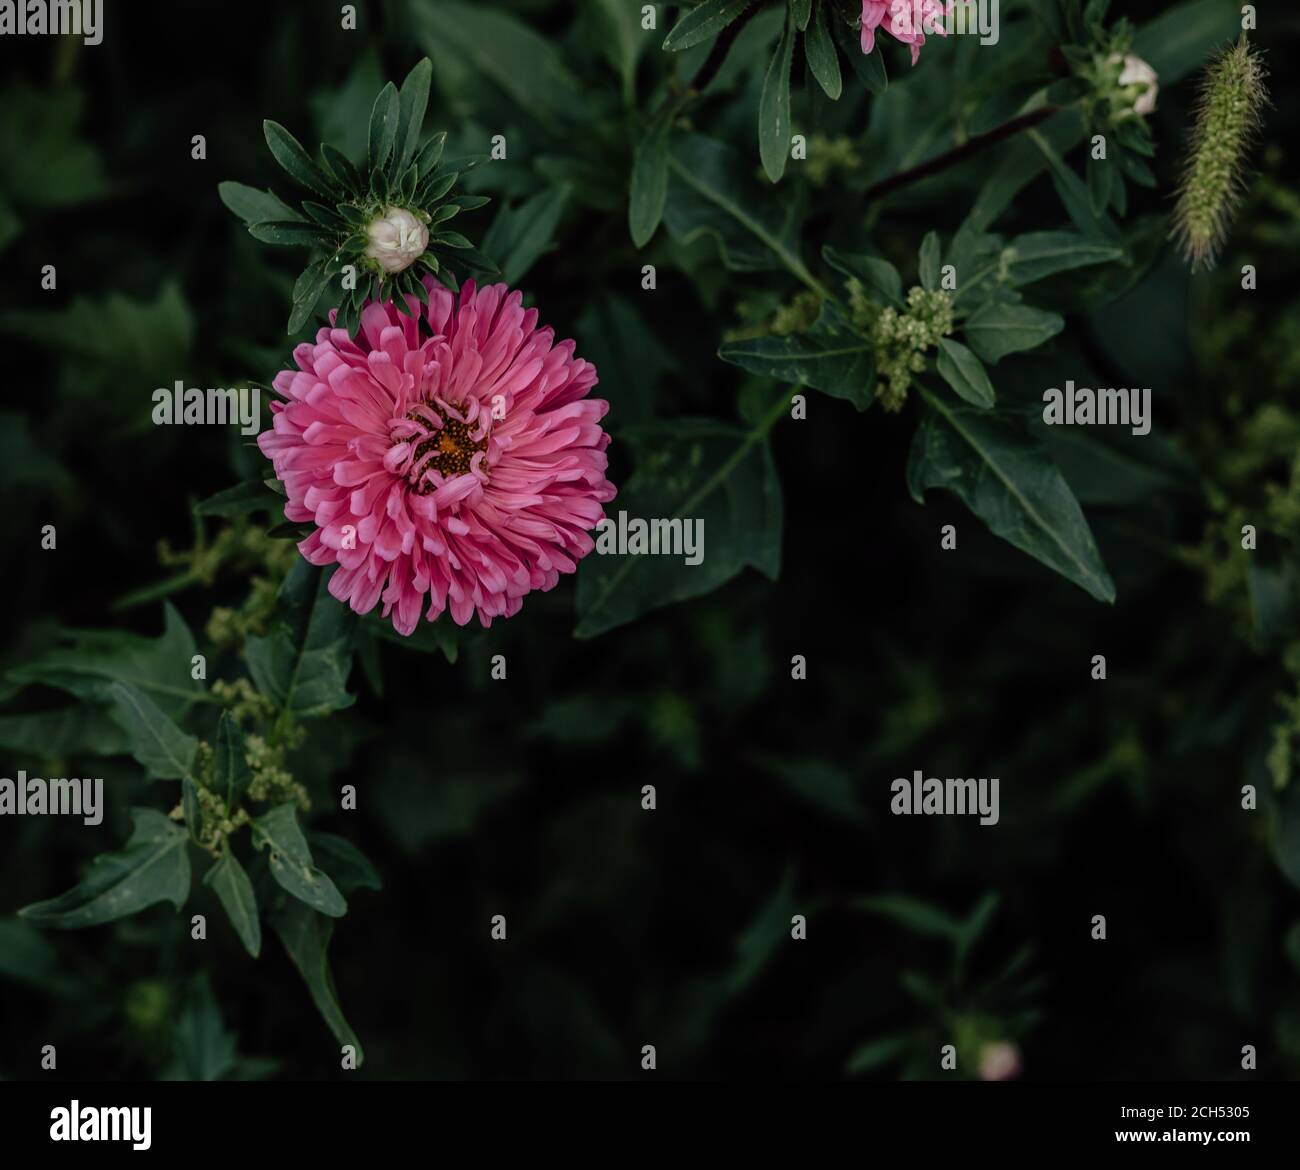 Pink Aster flower. Background of green leaves. Stock Photo